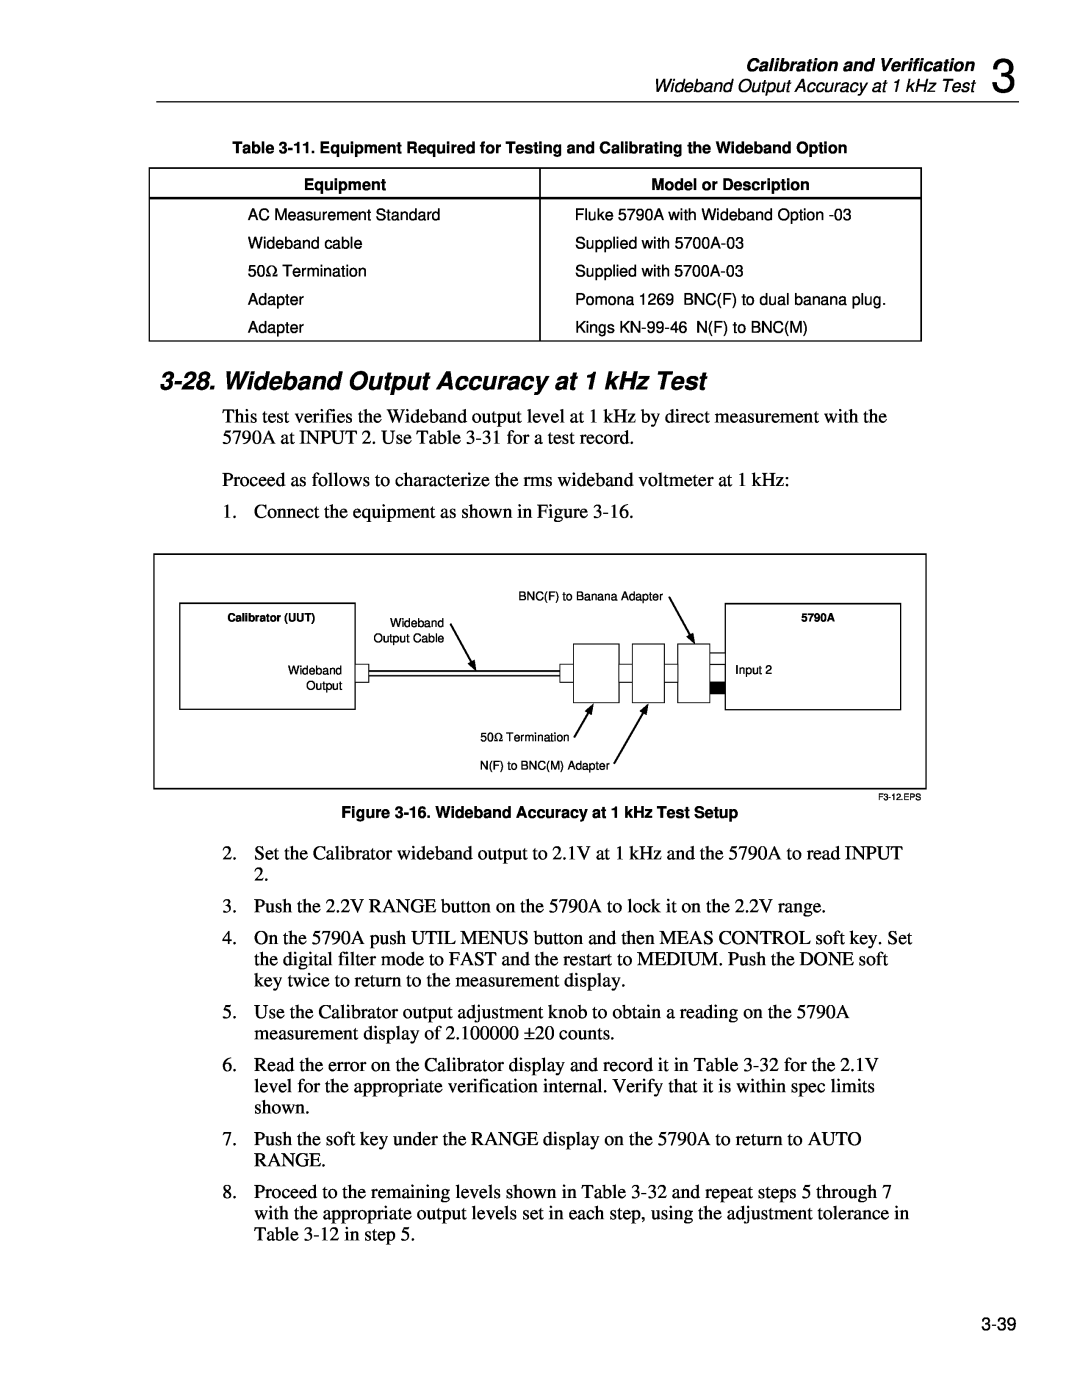 Fluke 5720A service manual Wideband Output Accuracy at 1 kHz Test 